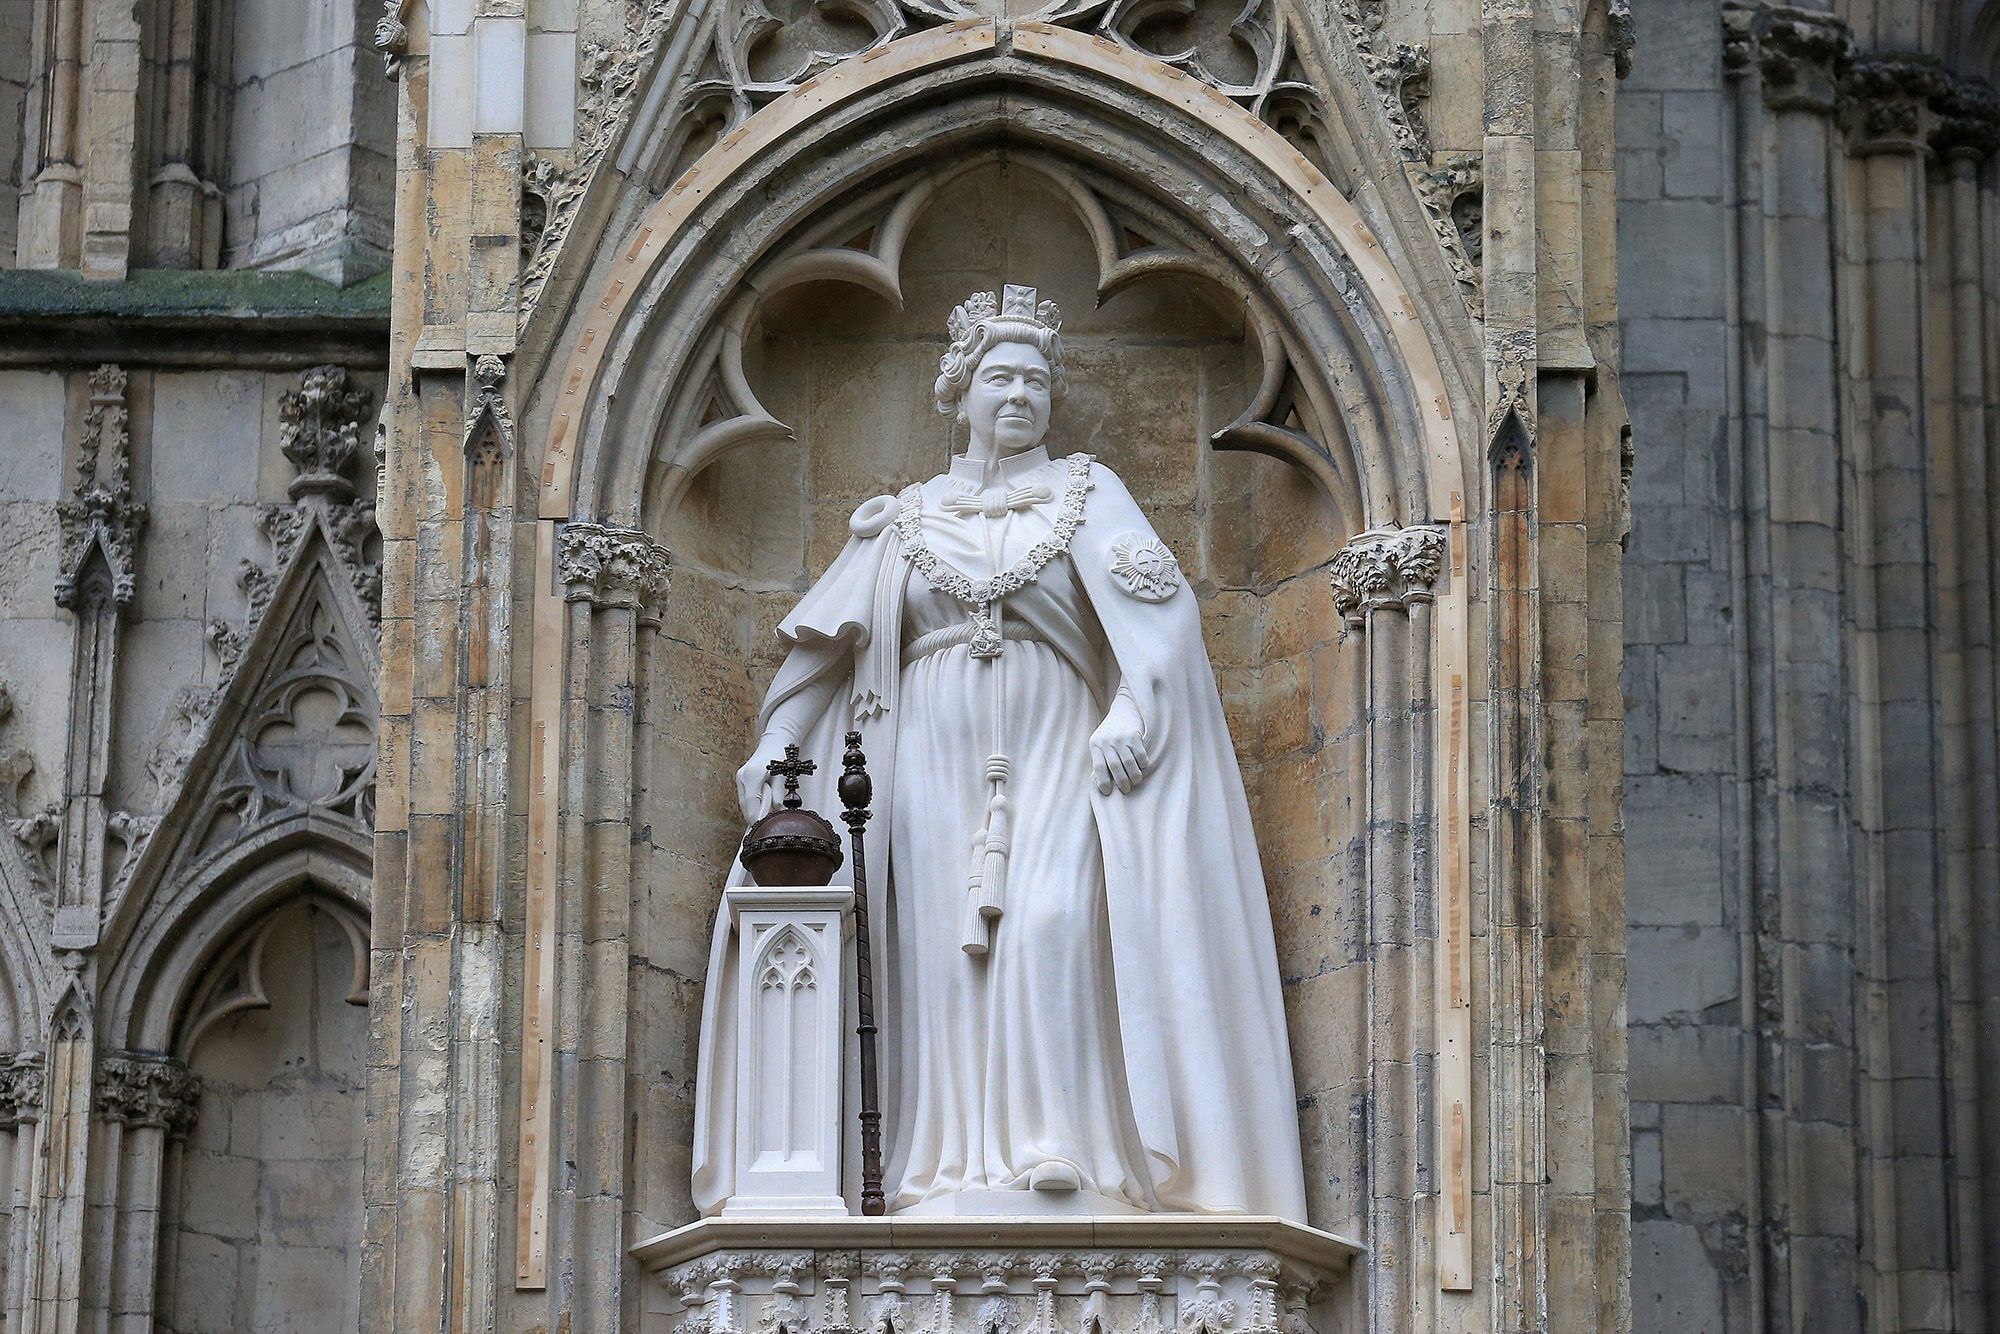 10 (lesser known) statues of English monarchs in London…2. King